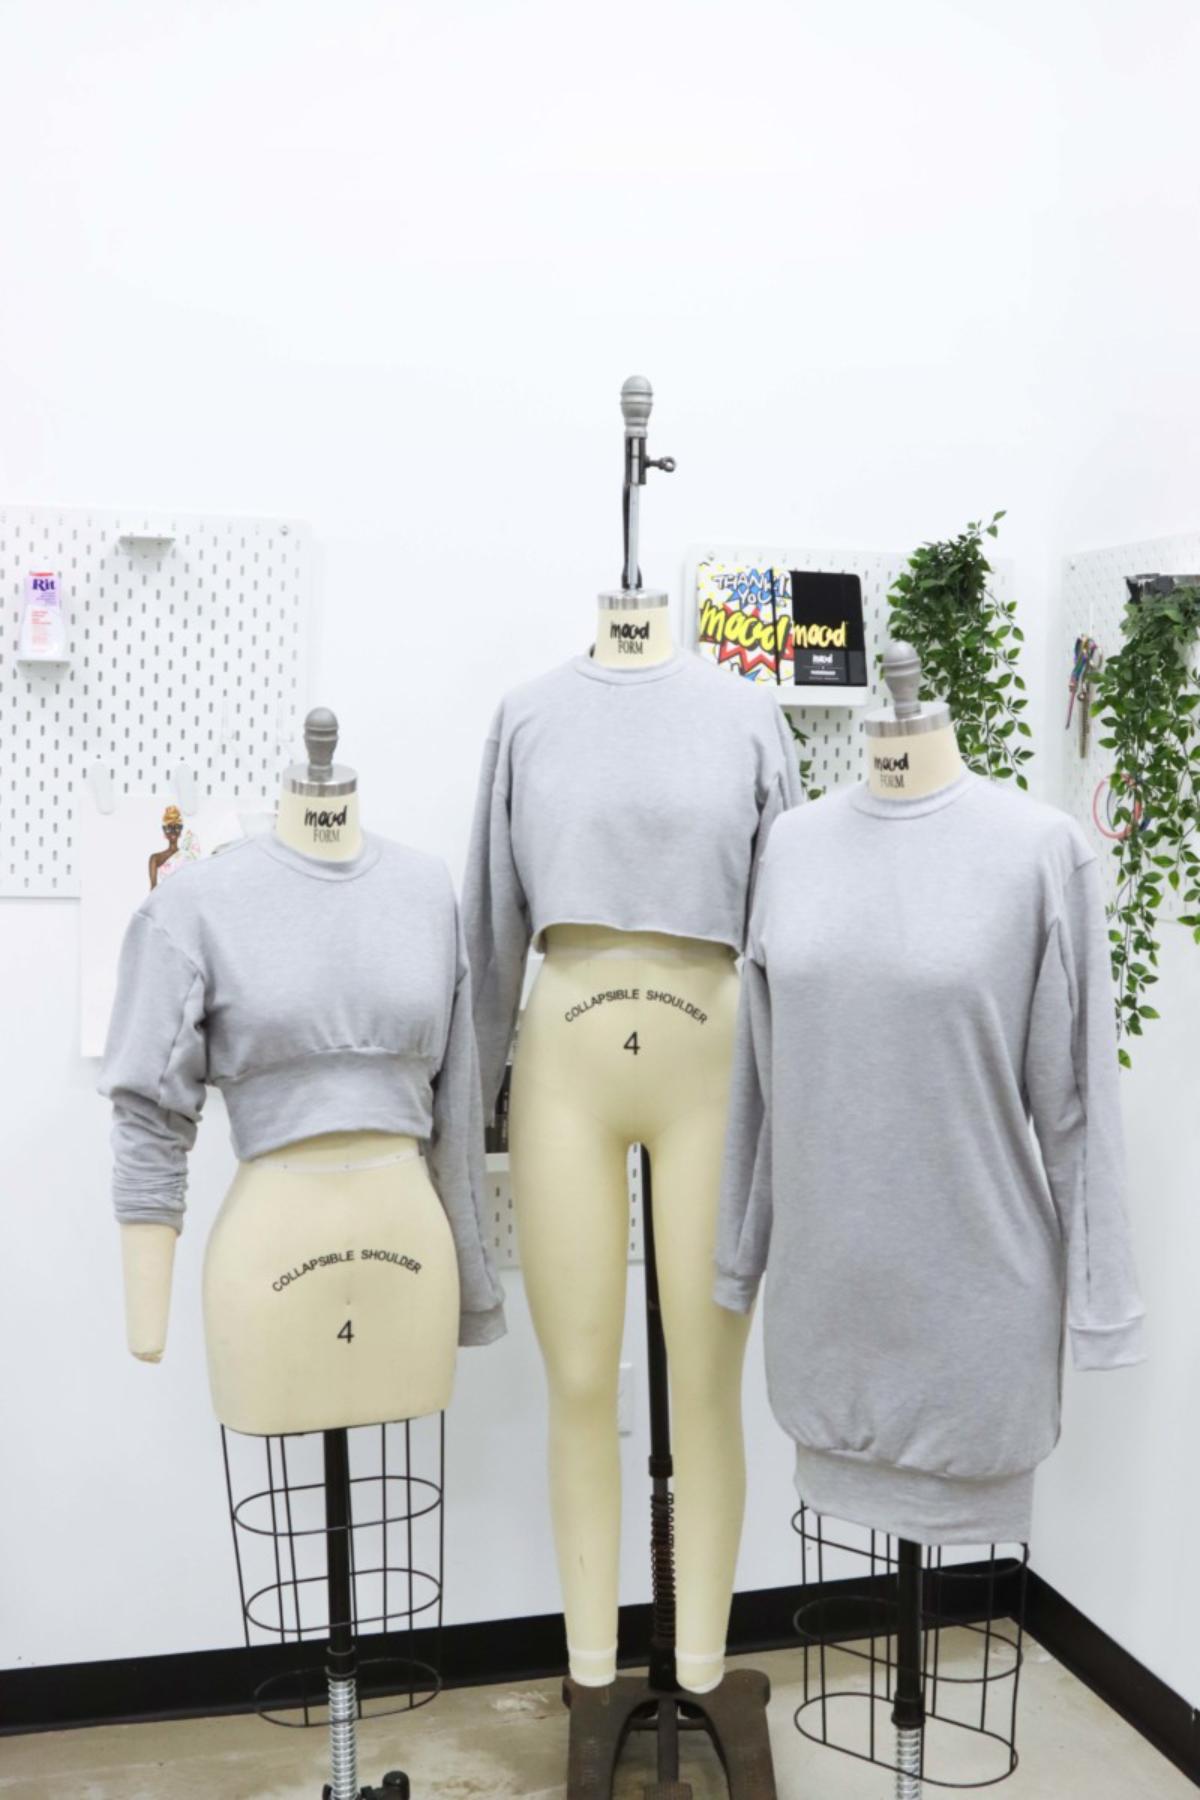 The Buttercup Sweatshirt Collection